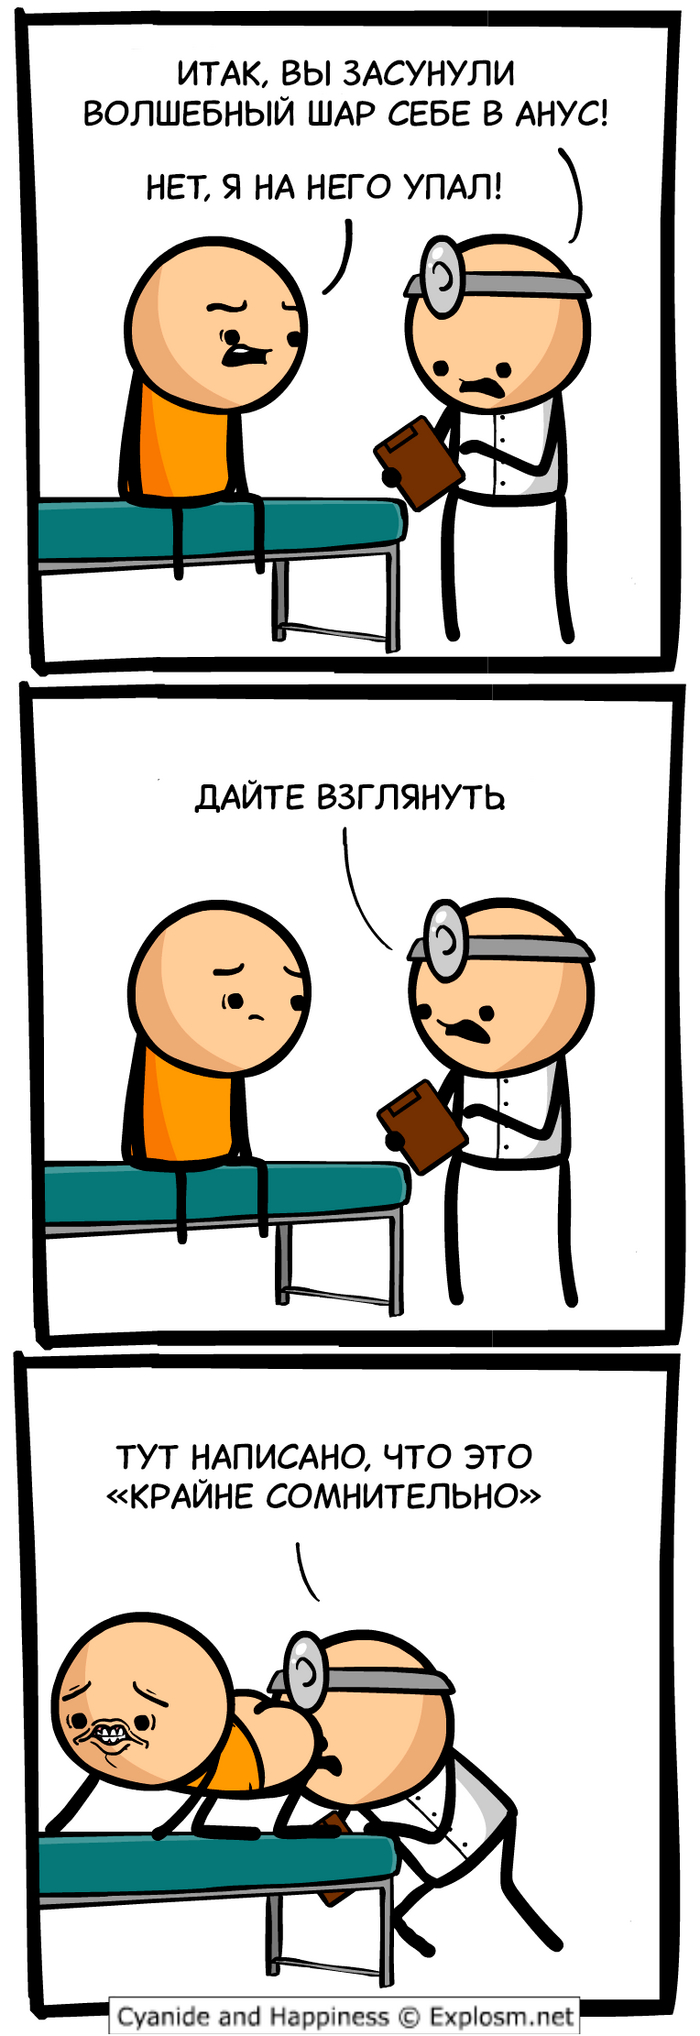   ,  , , Cyanide and Happiness, 